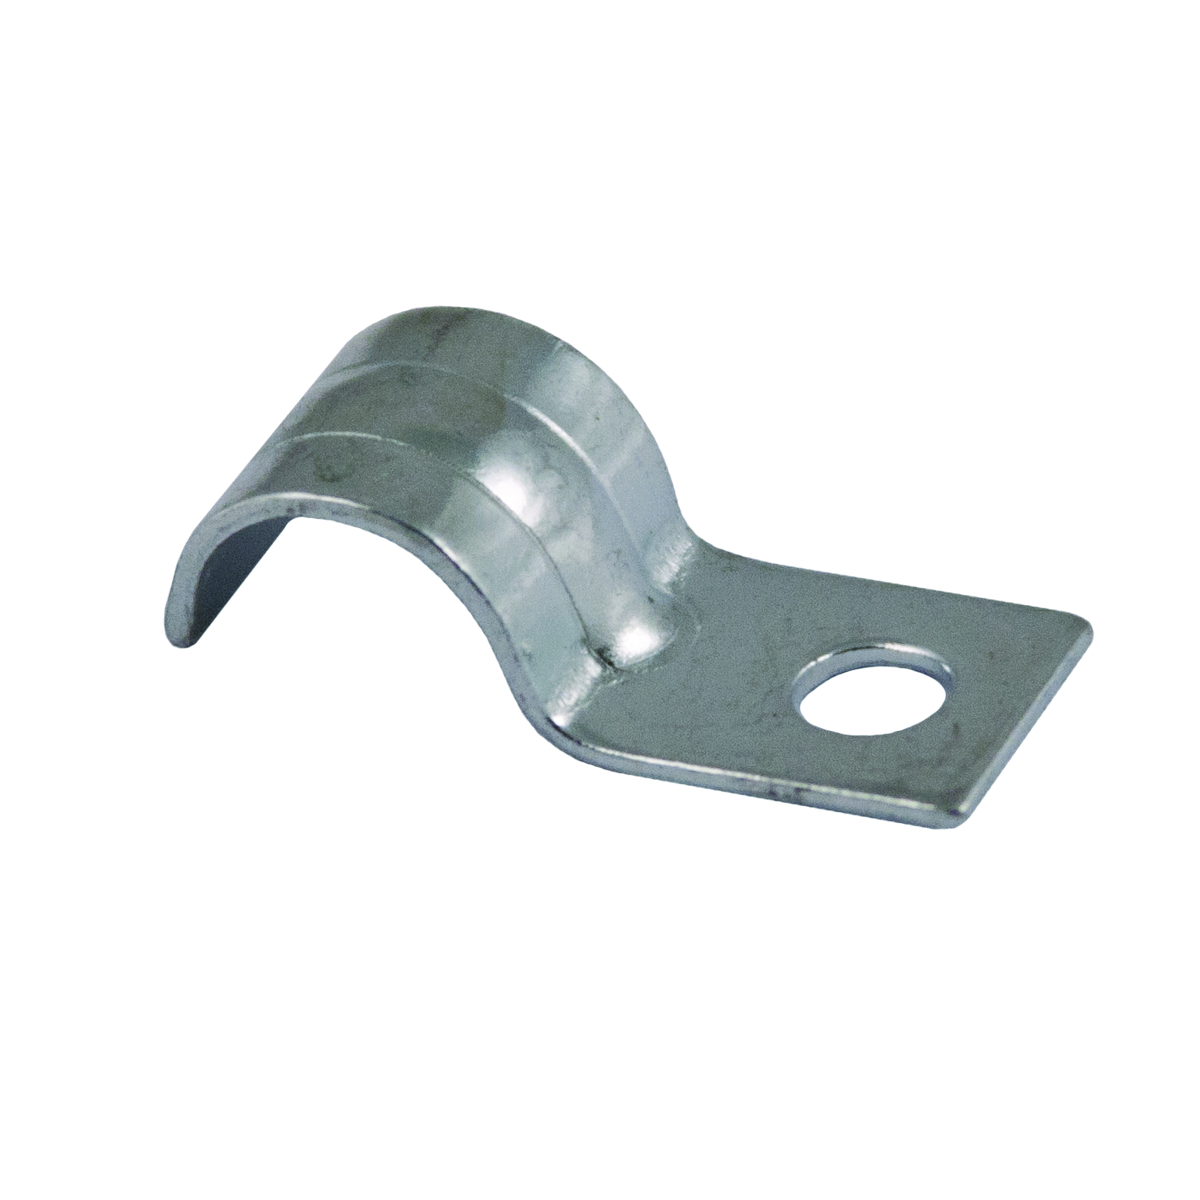 One Hole Strap Steel, 3/8 In. Trade Size